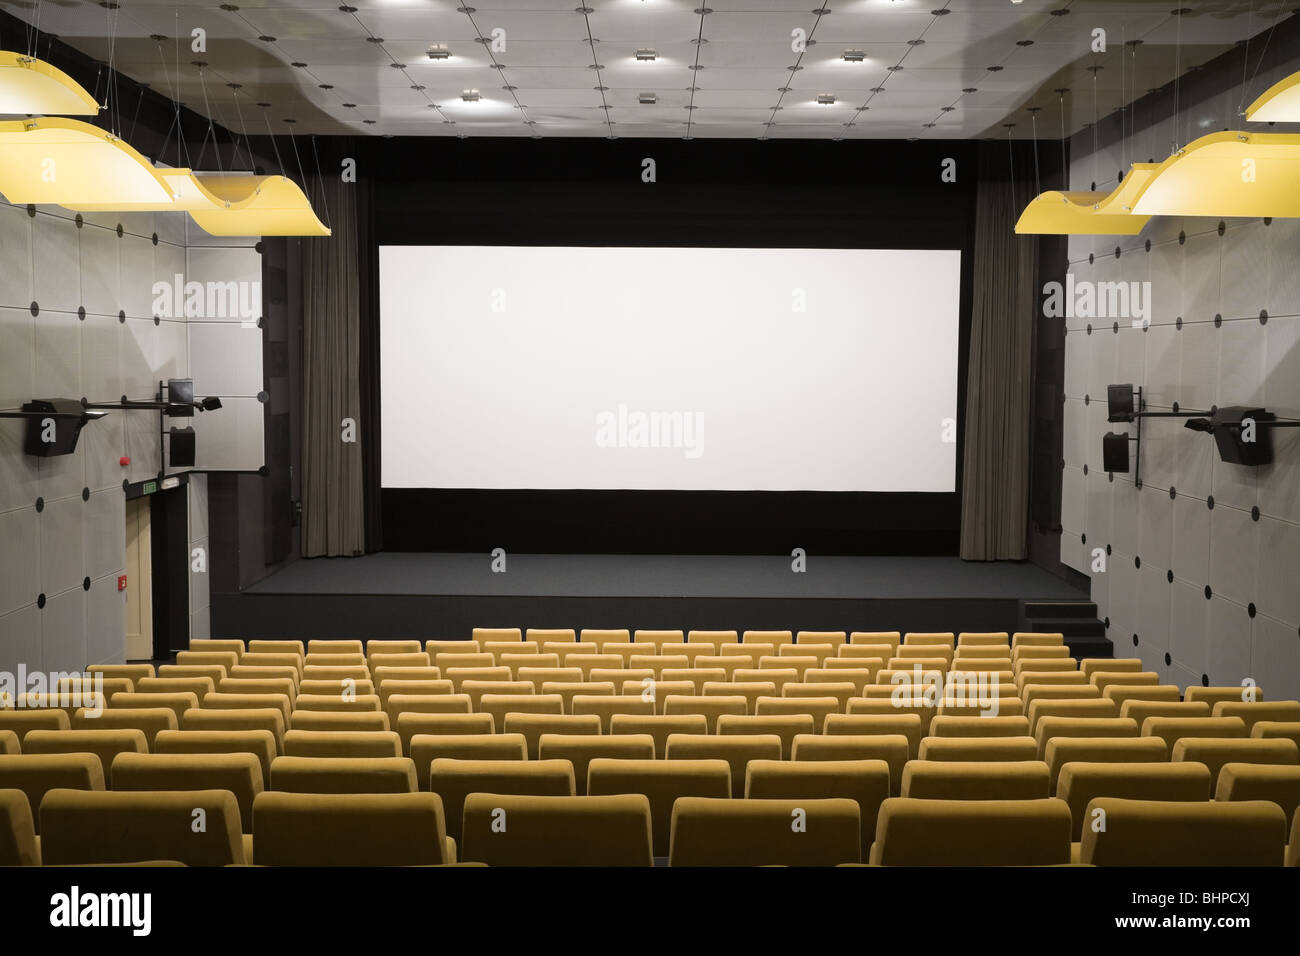 Empty cinema auditorium with line of yellow chairs, stage and projection screen. Ready for adding your own picture. Stock Photo